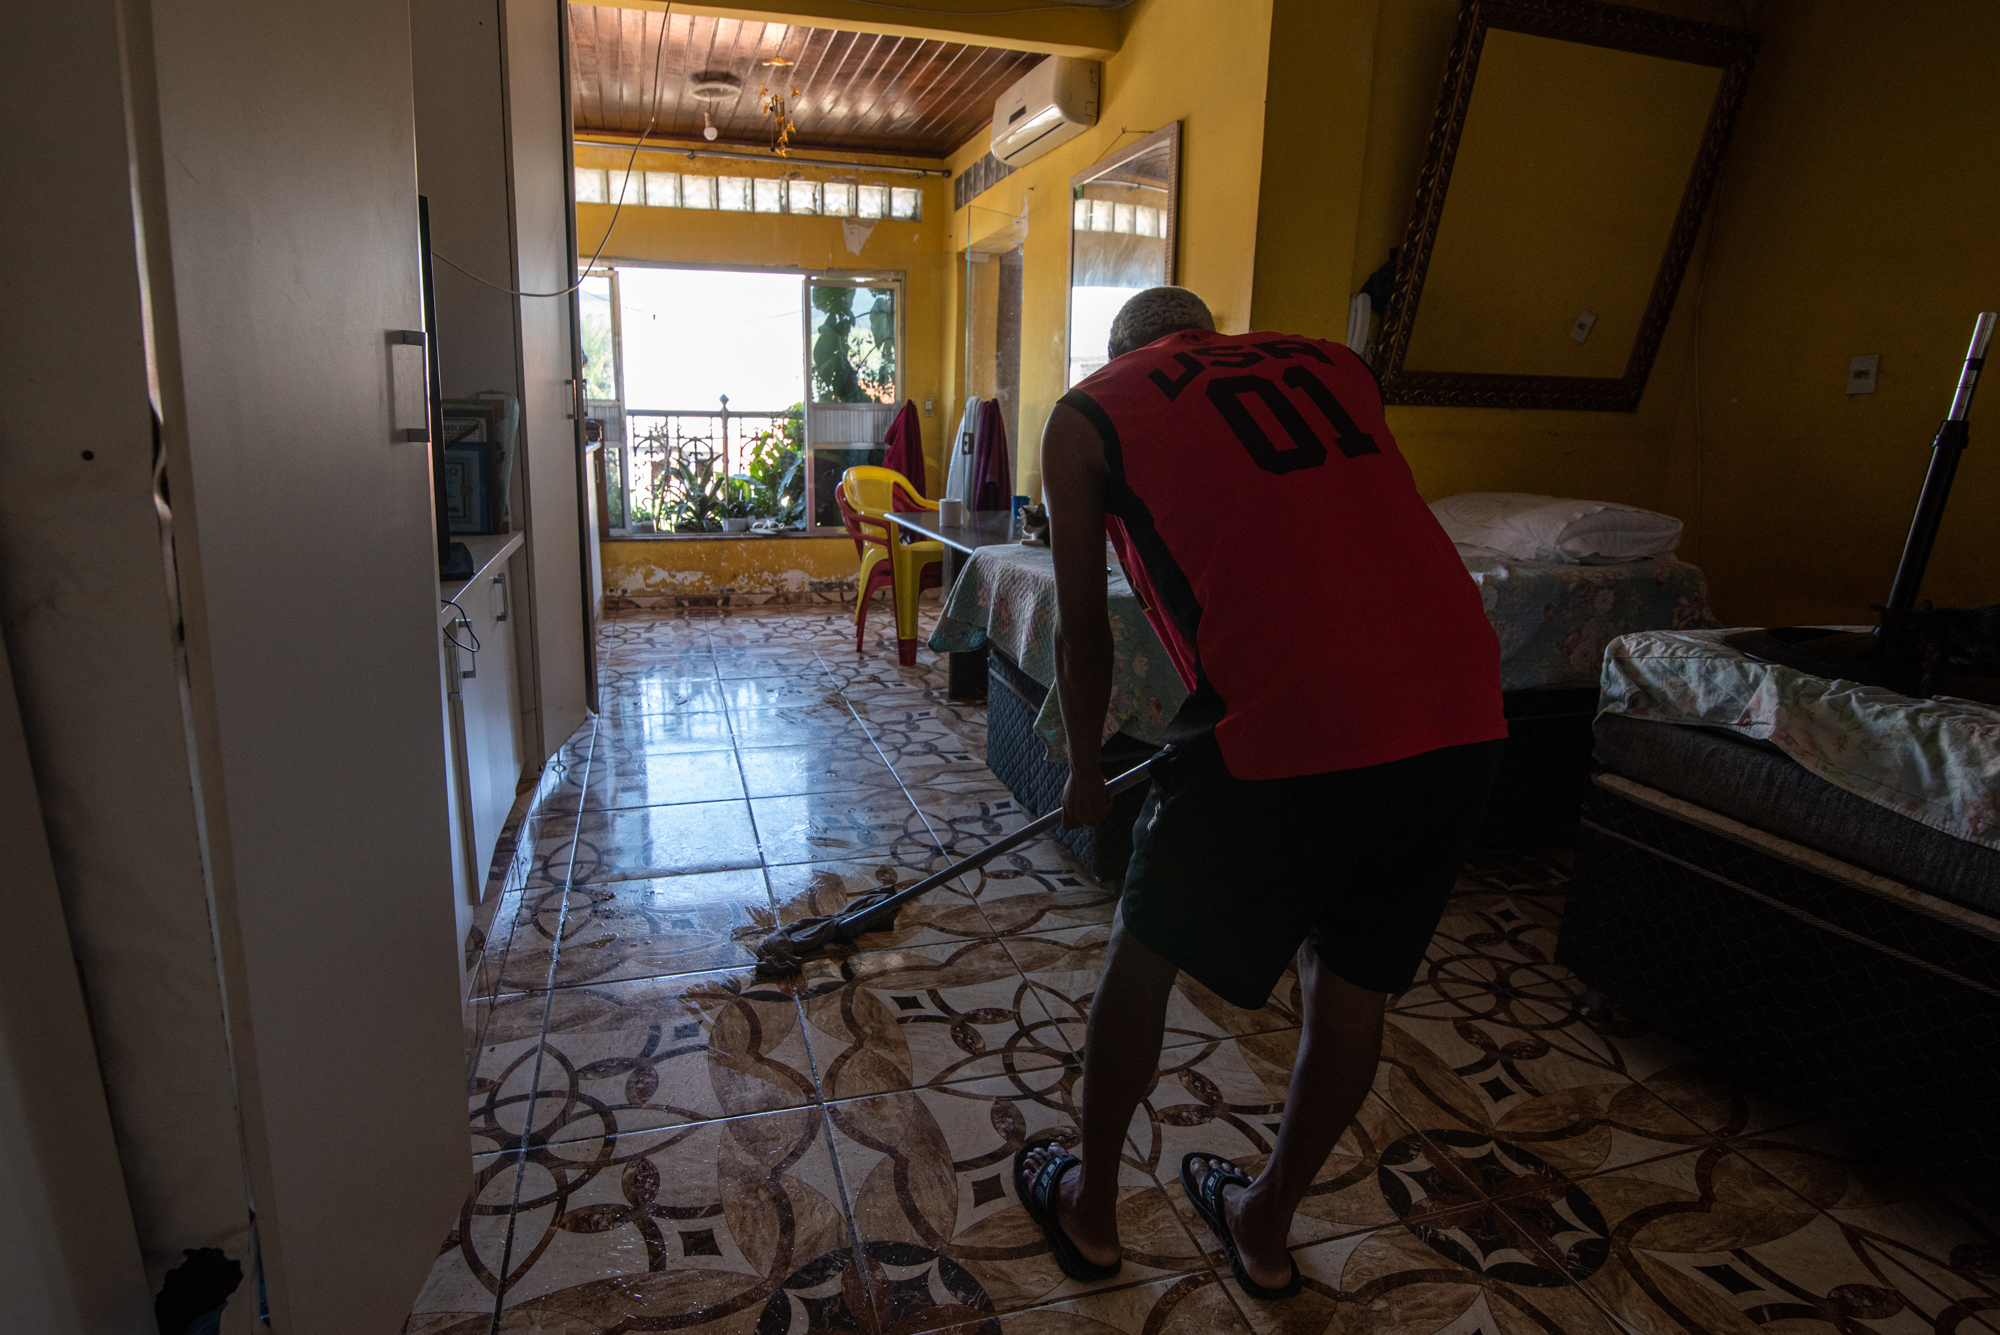 Casa Dulce Seixas resident Wendel Felice helps keep the space clean. All work is carried out collectively. Photo: Bárbara Dias